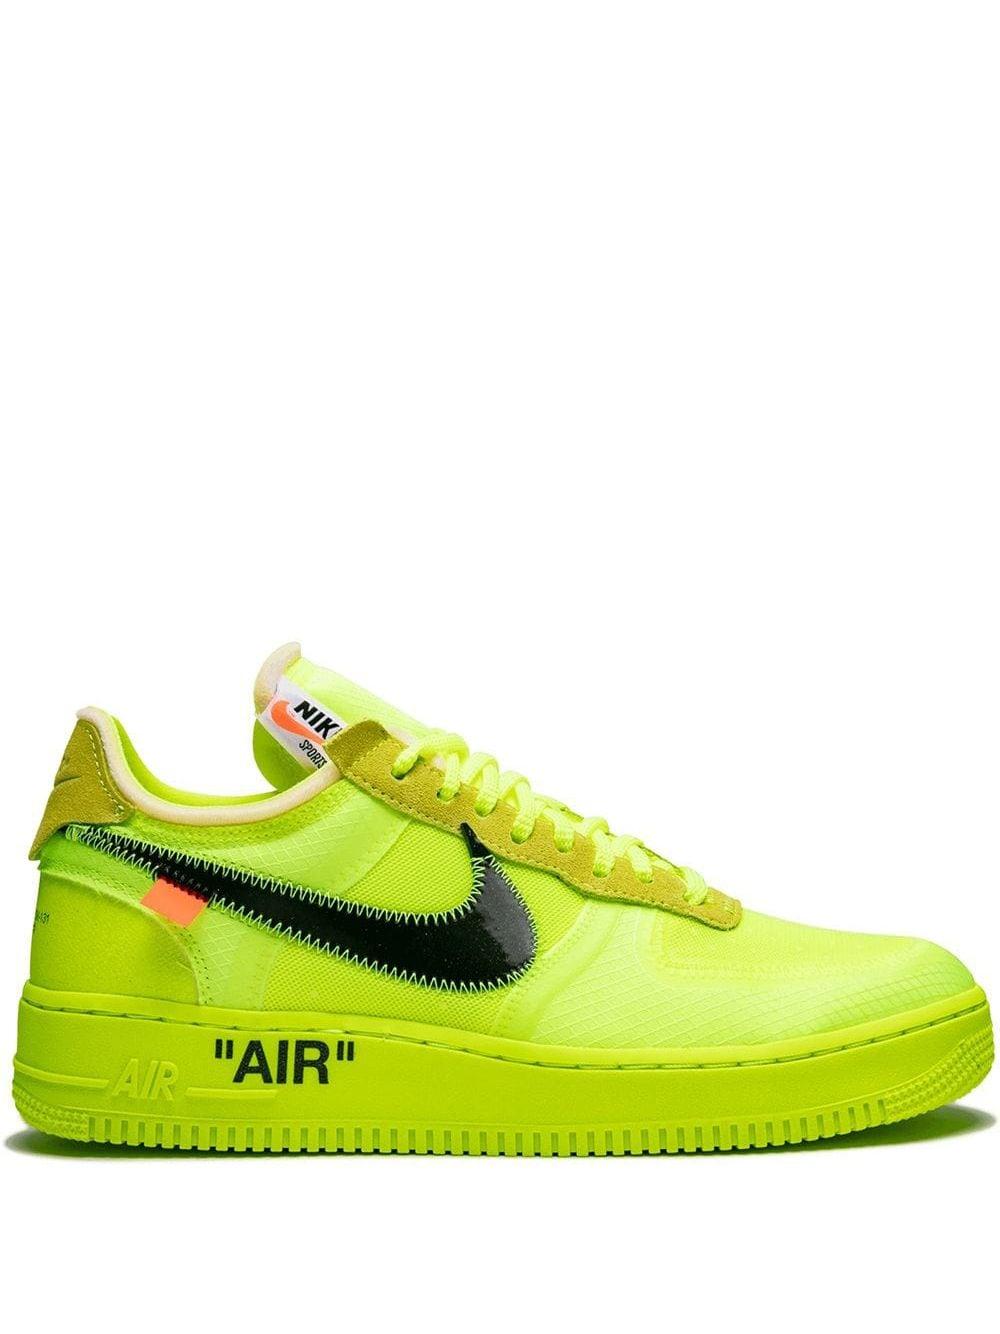 NIKE X OFF-WHITE The 10: Air Force 1 Low 'off-white Volt' Shoes in Green ( Yellow) for Men - Save 7% | Lyst